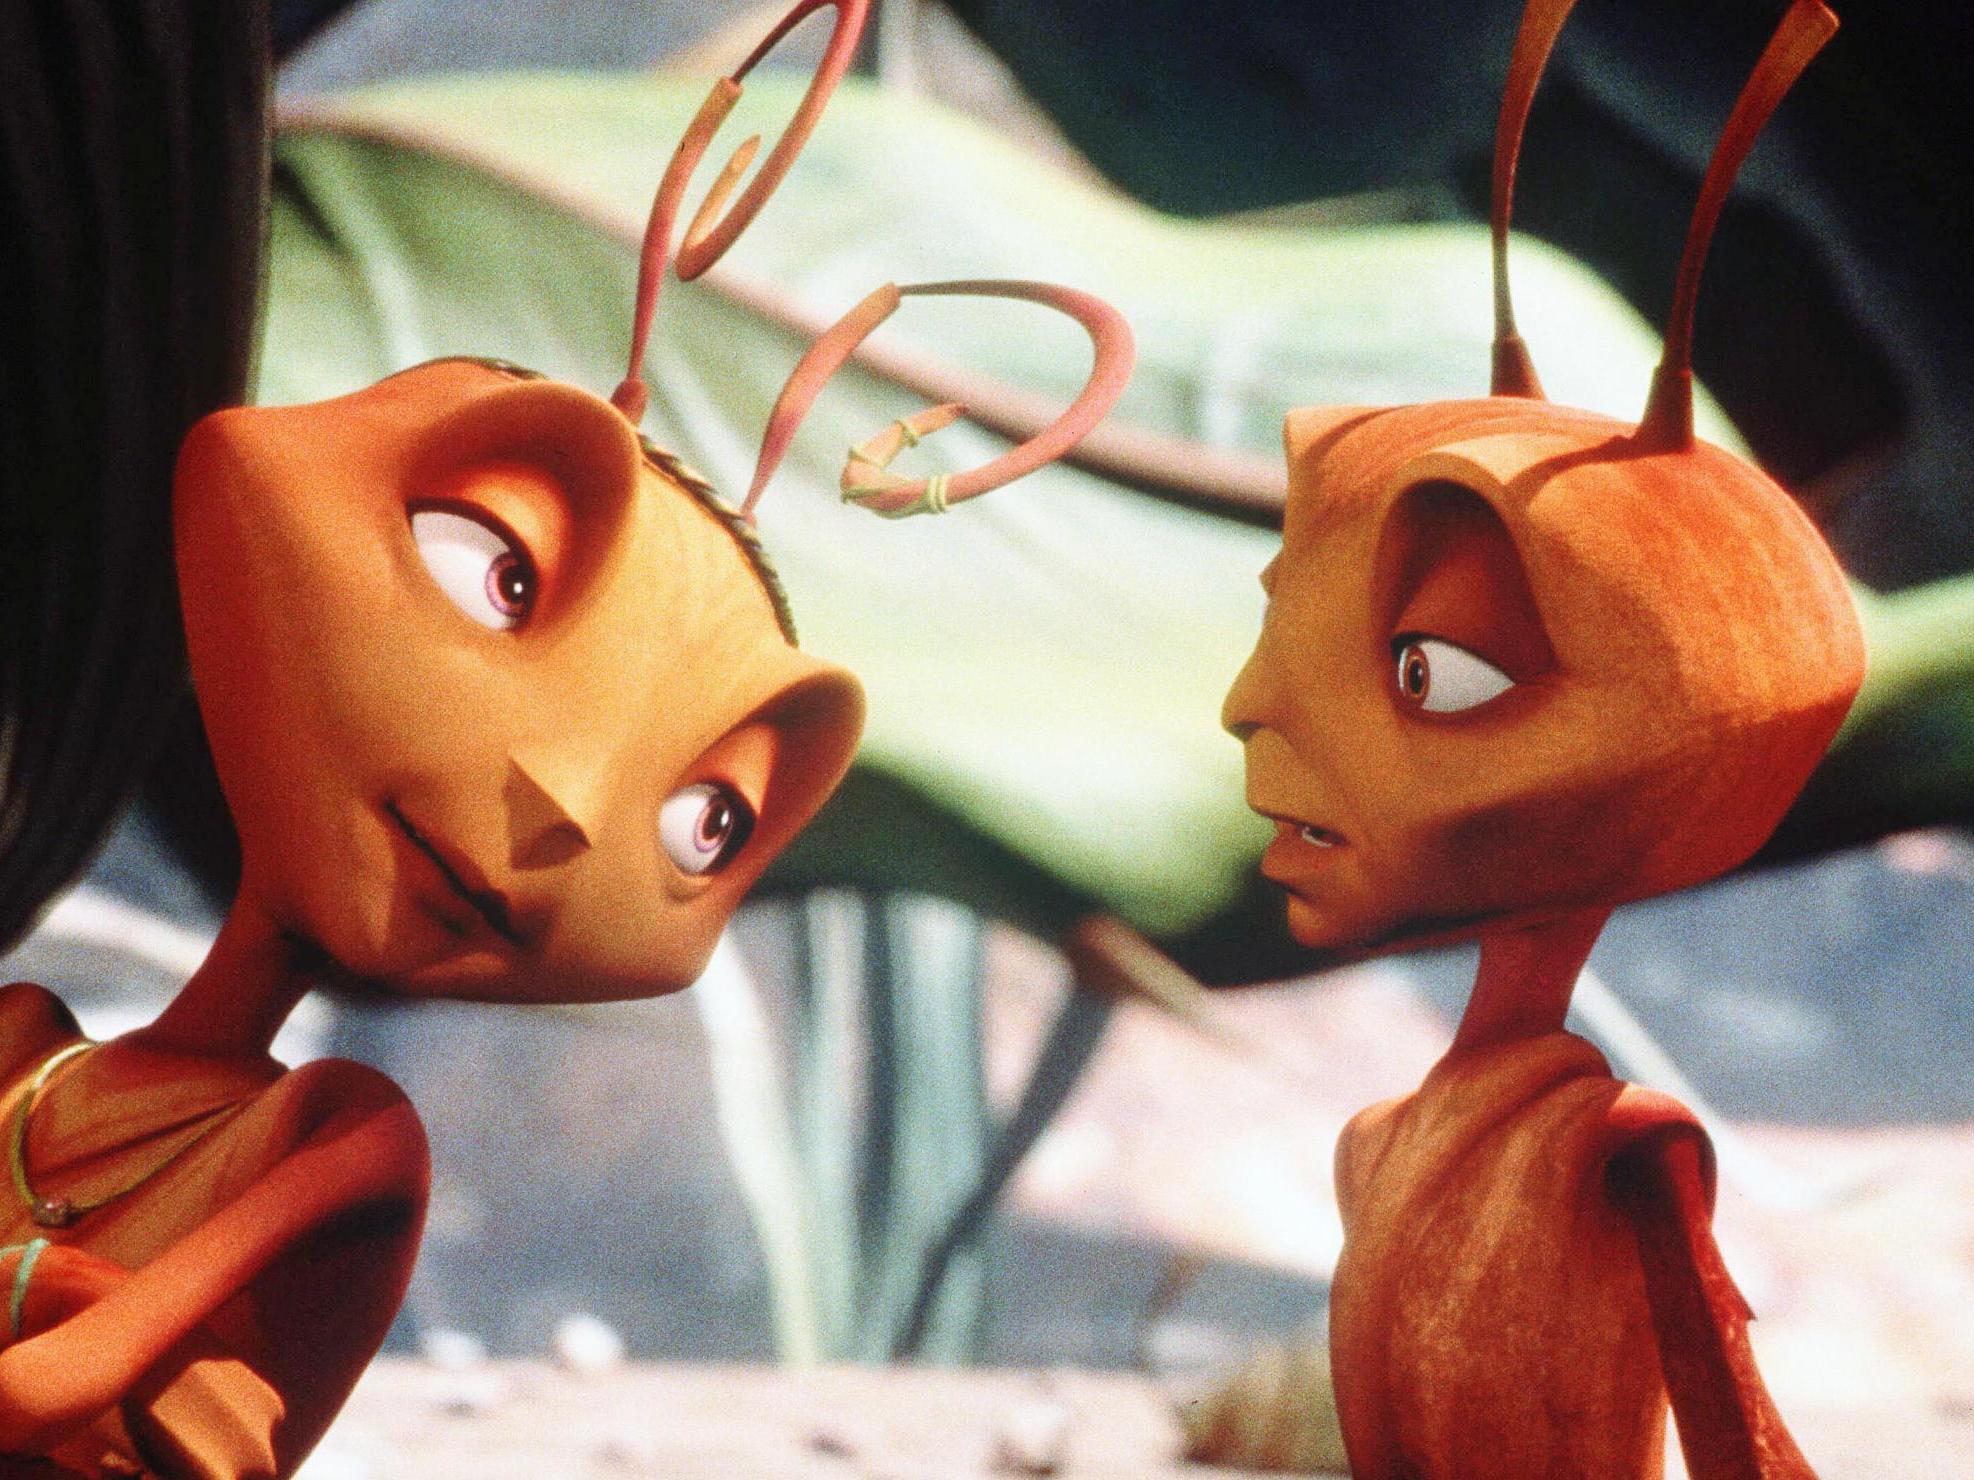 Sharon Stone and Woody Allen voiced the leads in Antz